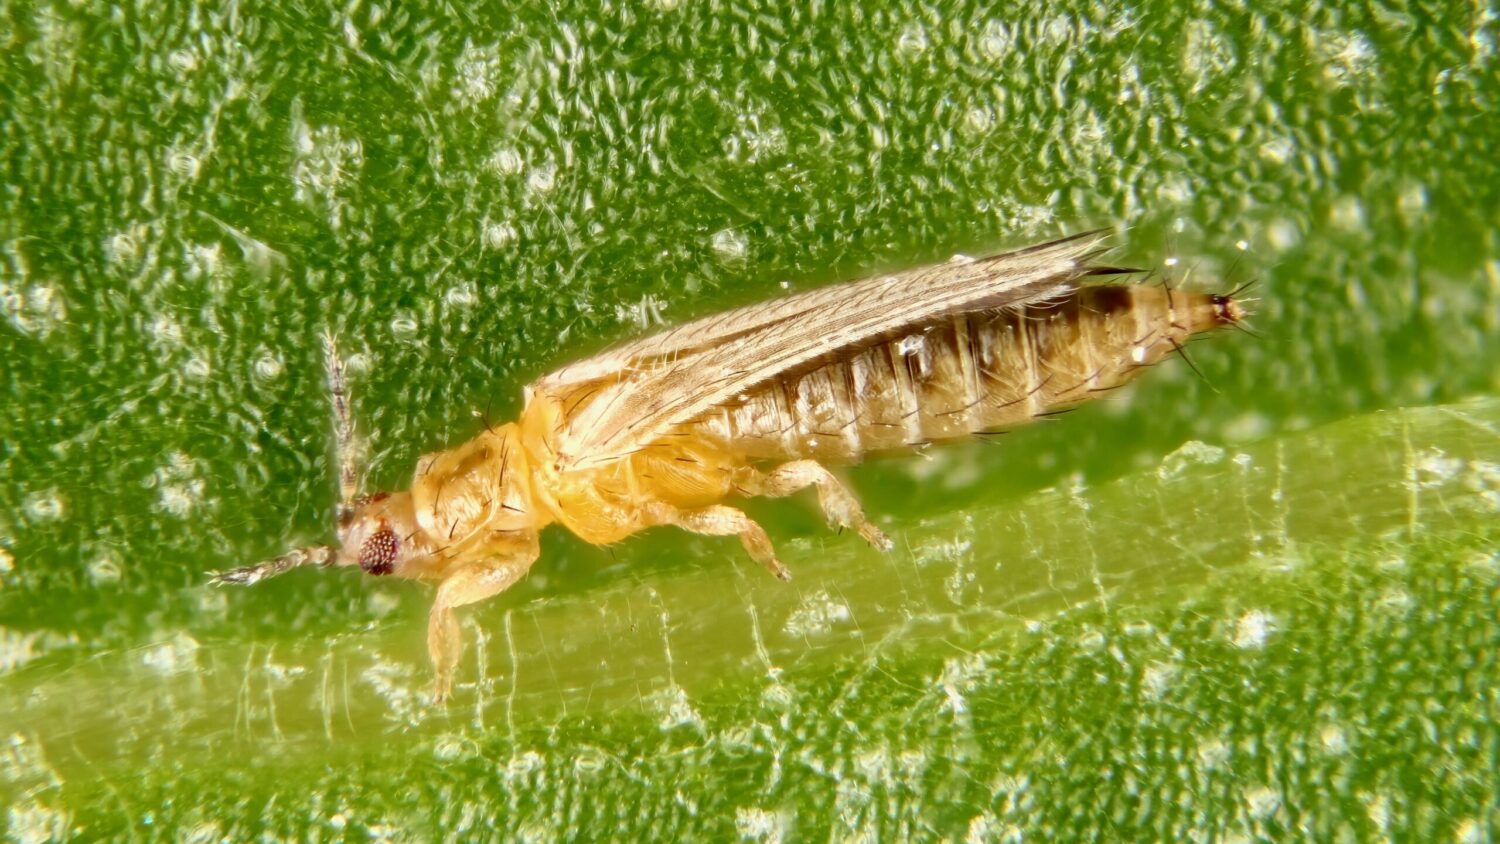 The western flower thrips (Frankliniella occidentalis). Photo credit: Matthew Bertone, NC State, Department of Entomology and Plant Pathology